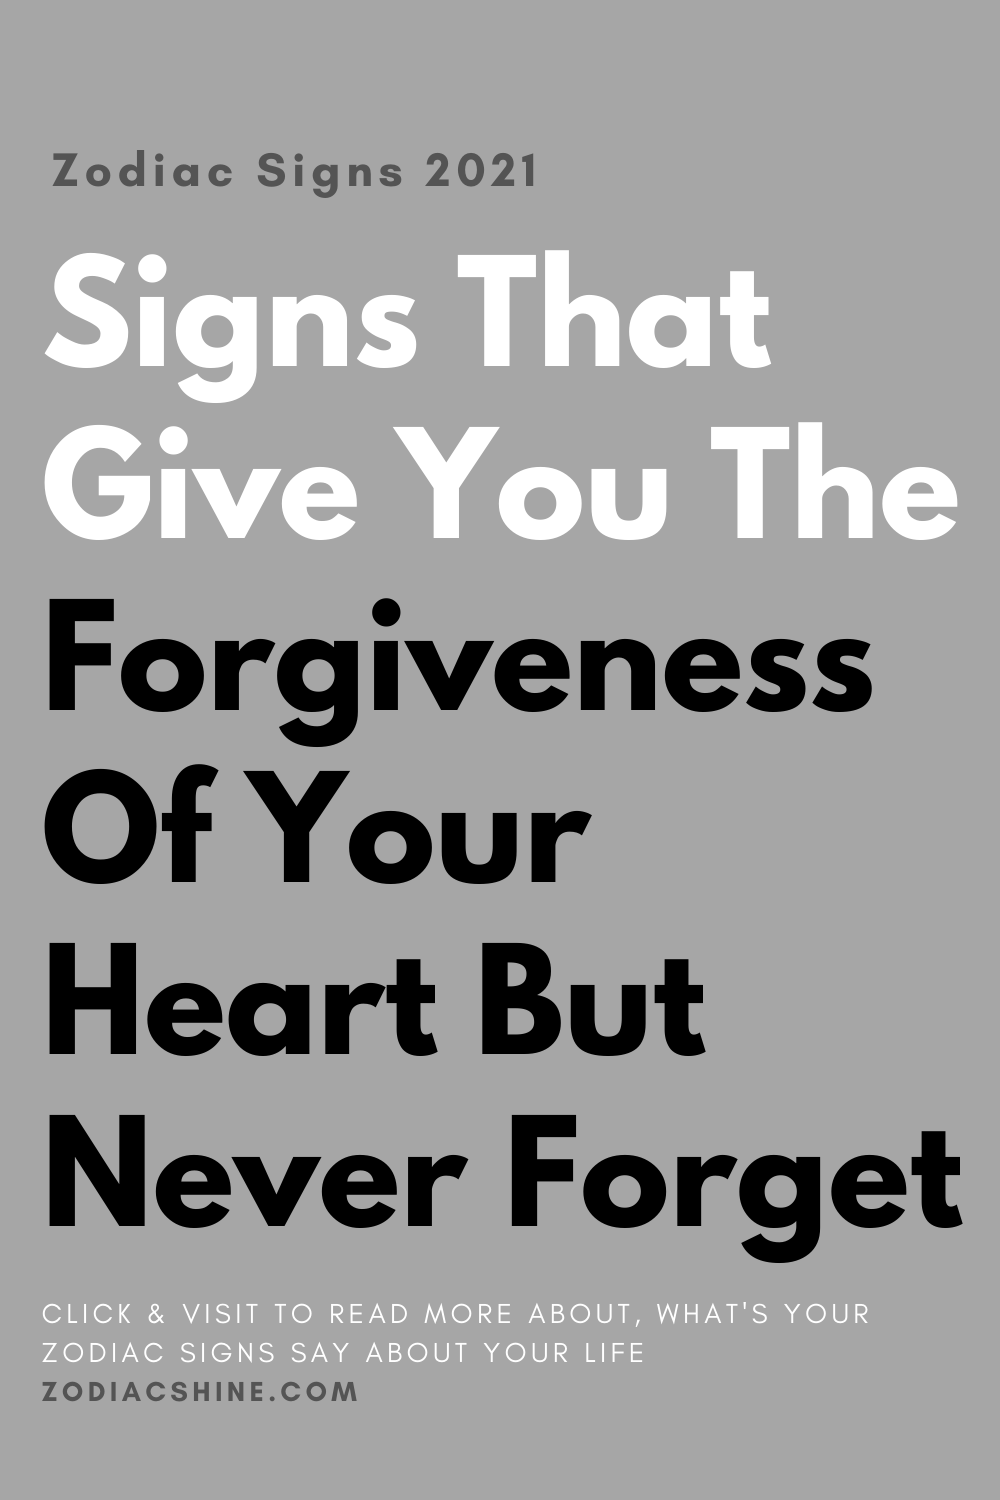 Signs That Give You The Forgiveness Of Your Heart But Never Forget